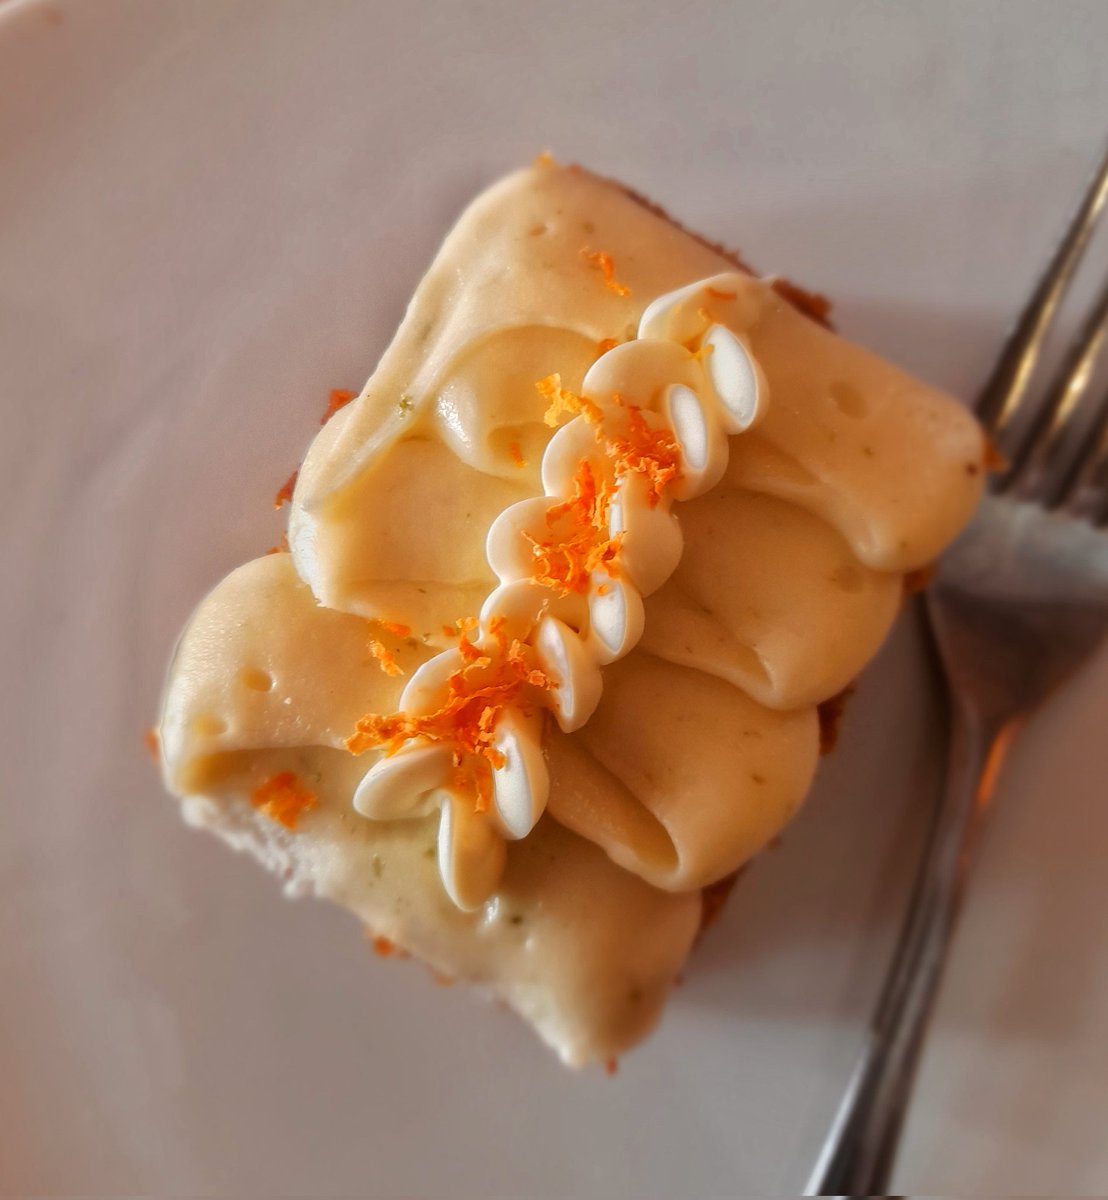 Feeling carrot-ly irresistible with this slice of heaven! #carrotcakeheaven #food #homemadesweets #carrotcake #cakes #cakelover #cake #frostingfanatic #foodphotography #instafood #foodie #foodgasm #likeforlikes #cakeoftheday #foodieheaven